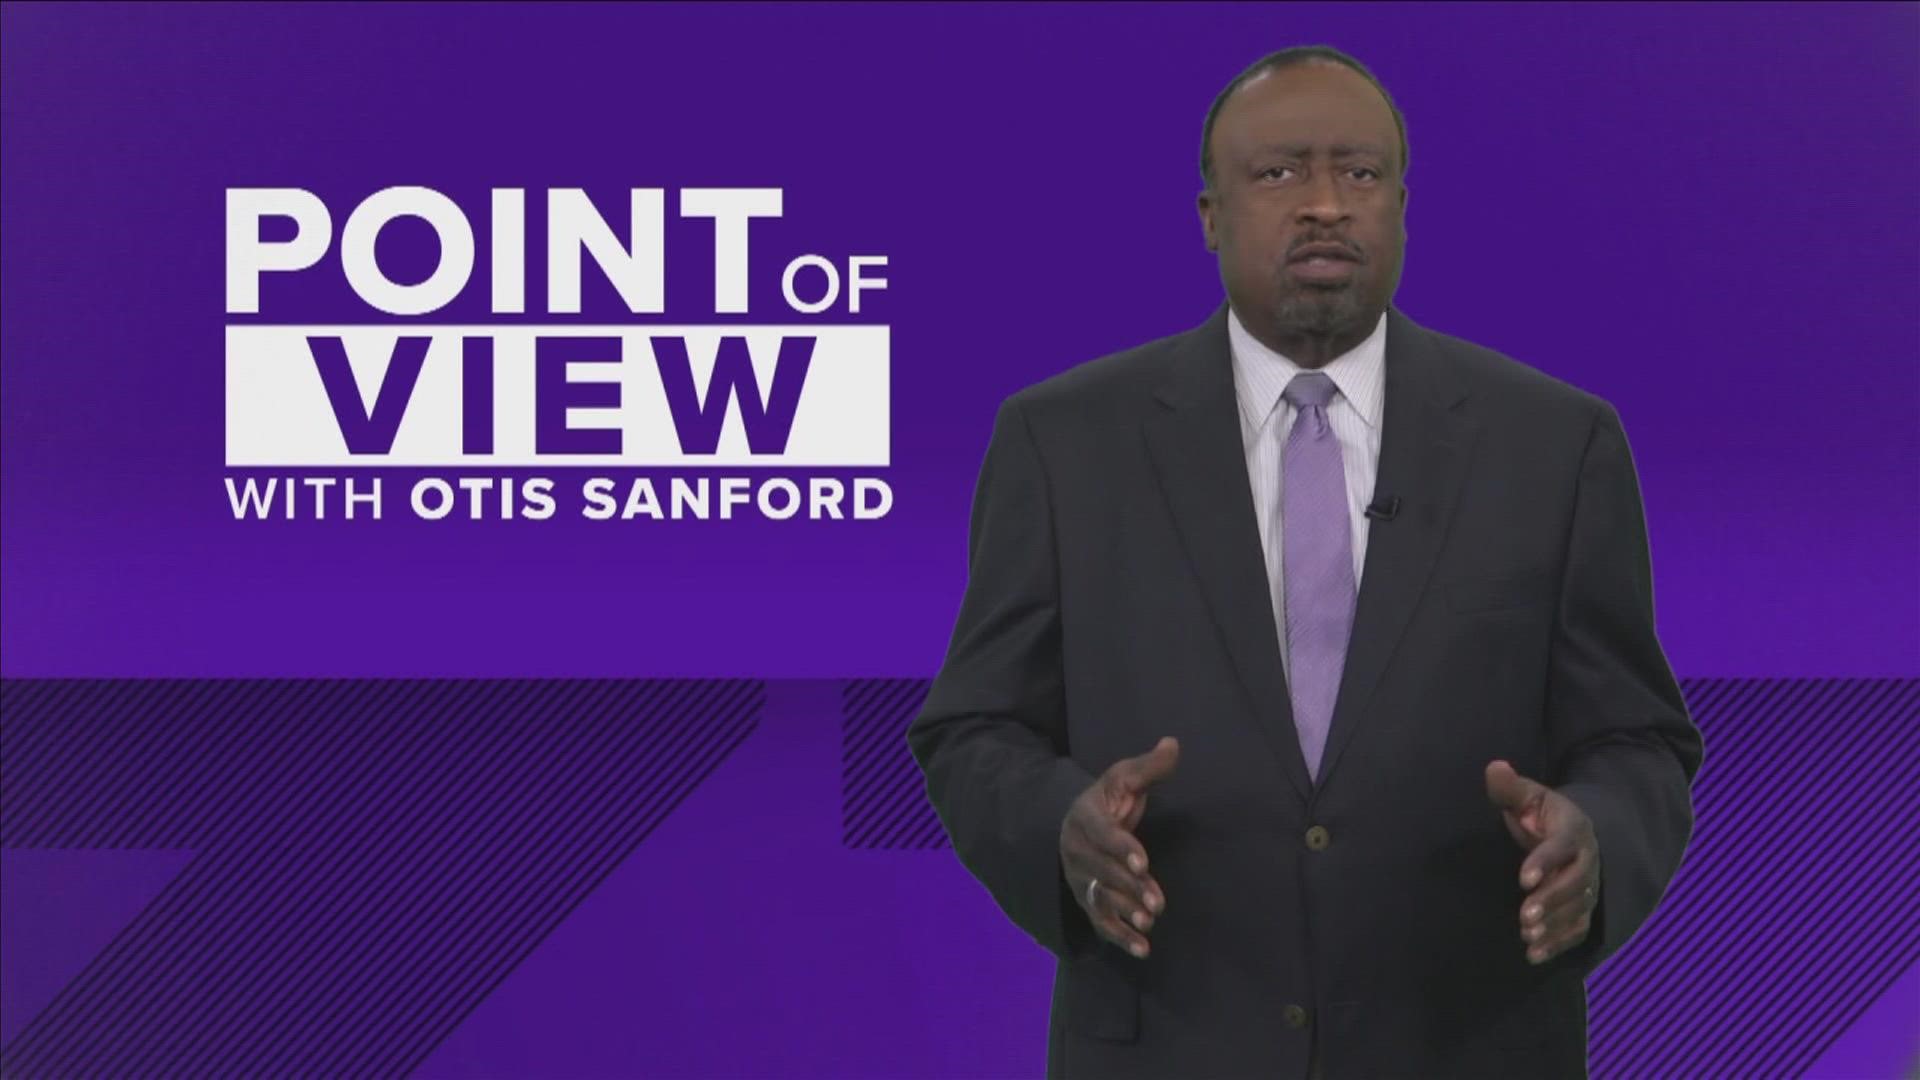 ABC24 political analyst and commentator Otis Sanford shared his point of view on the continuing battle against COVID-19 in the Mid-South.